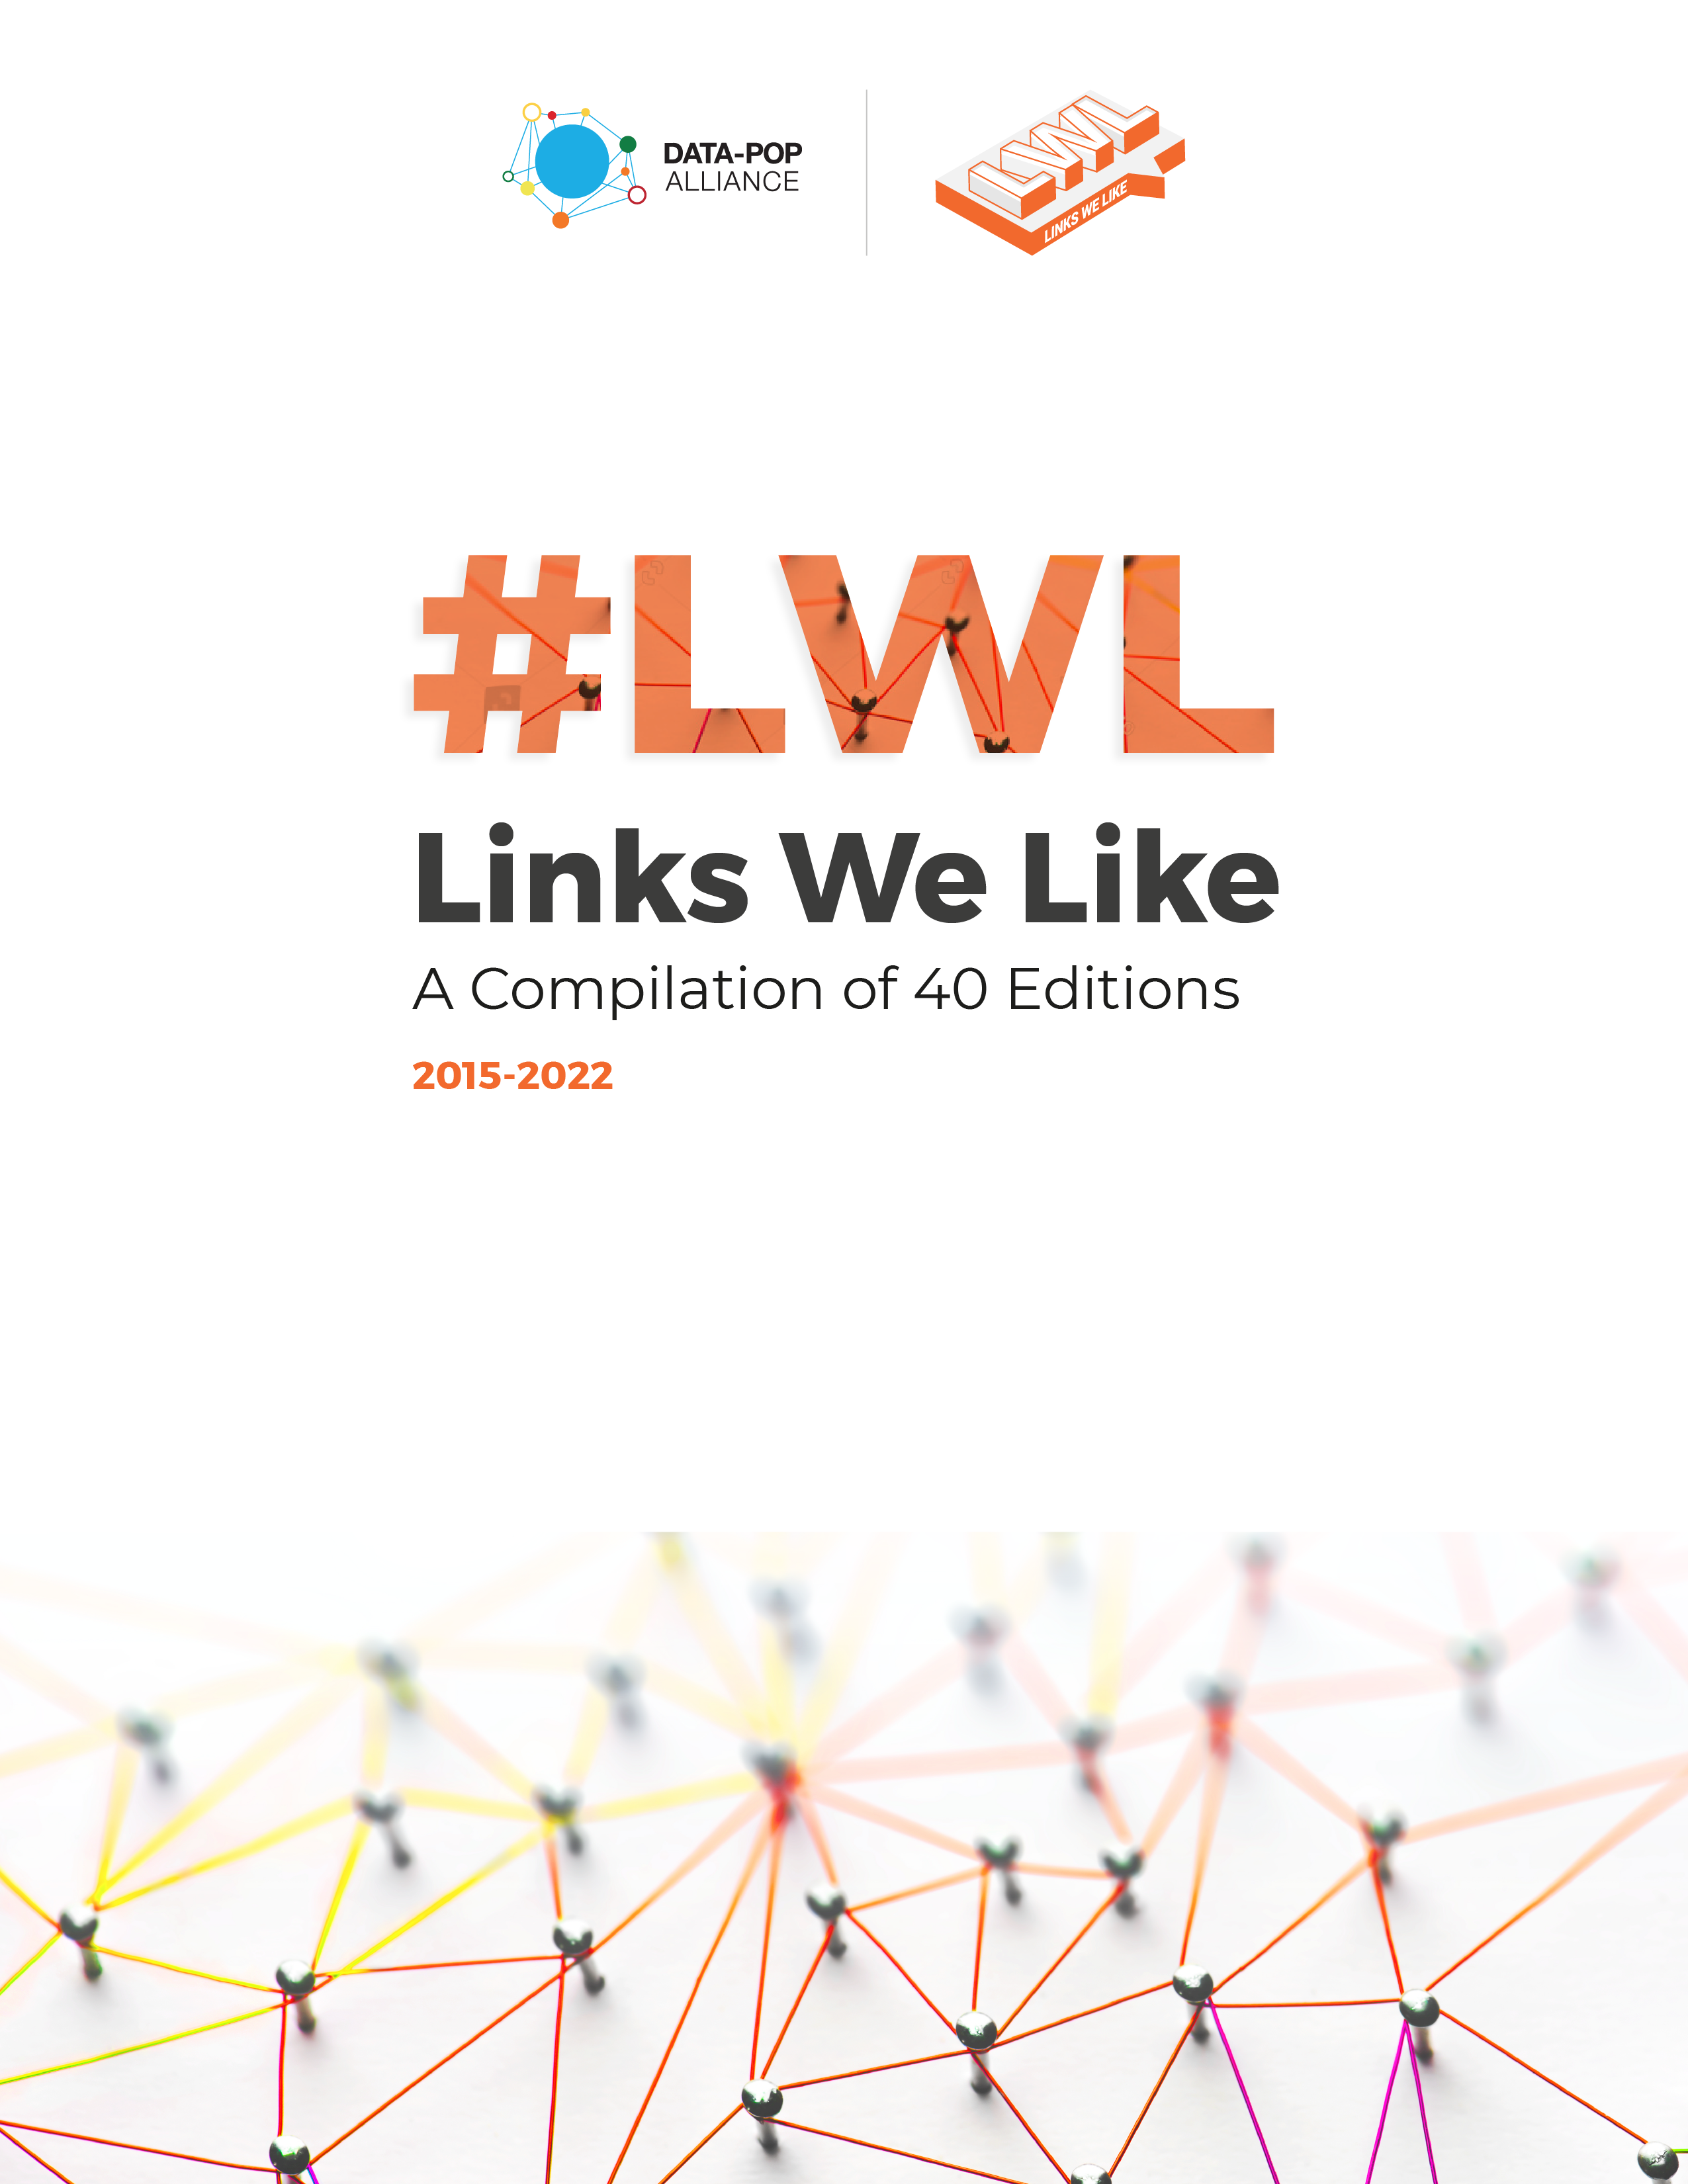 Links We Like: A Compilation of 40 Editions